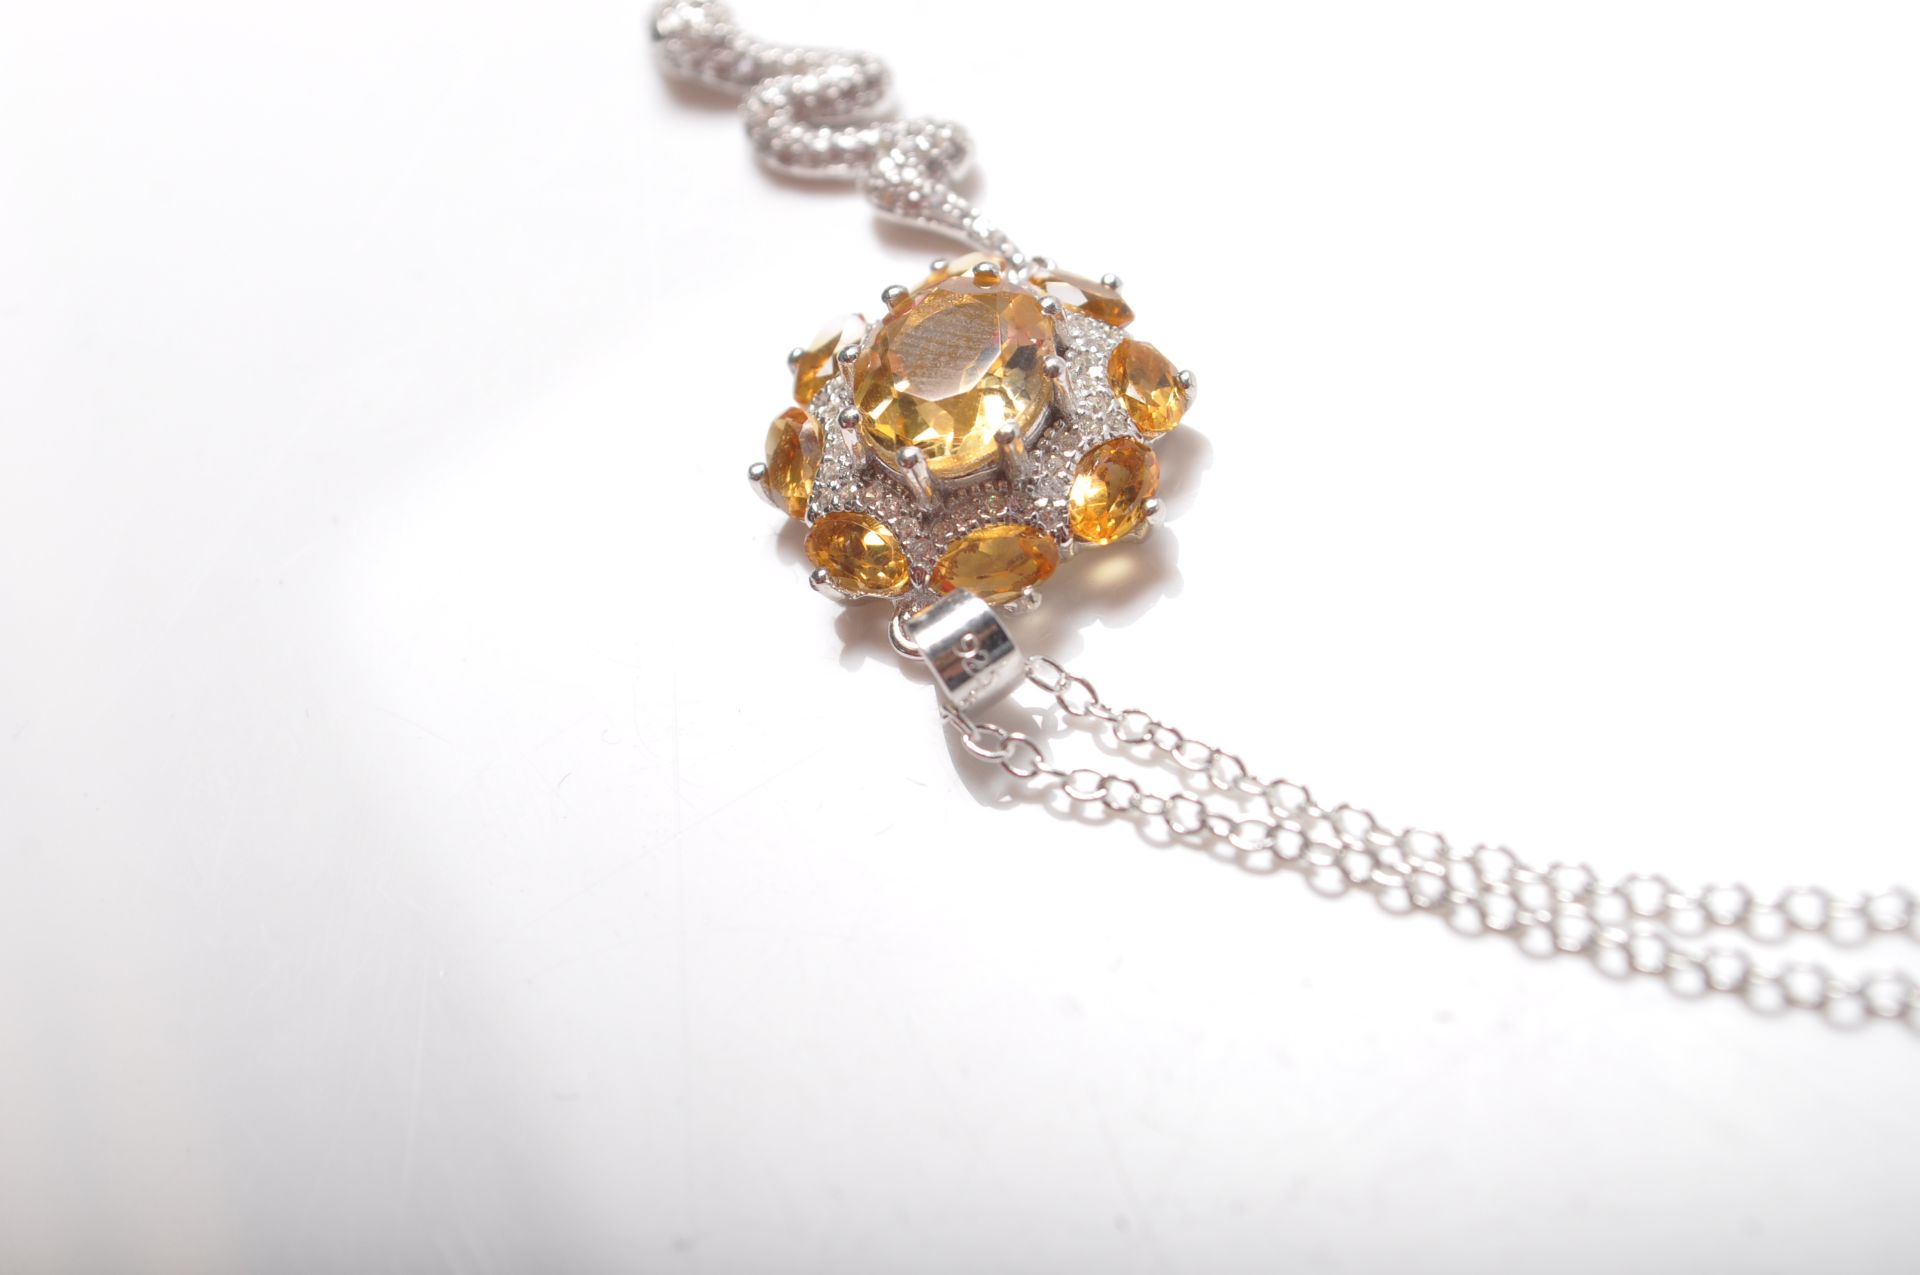 STAMPED 925 SILVER SNAKEDROP NECKLACE SET WITH YELLOW STONES AND CZ'S. - Image 7 of 8